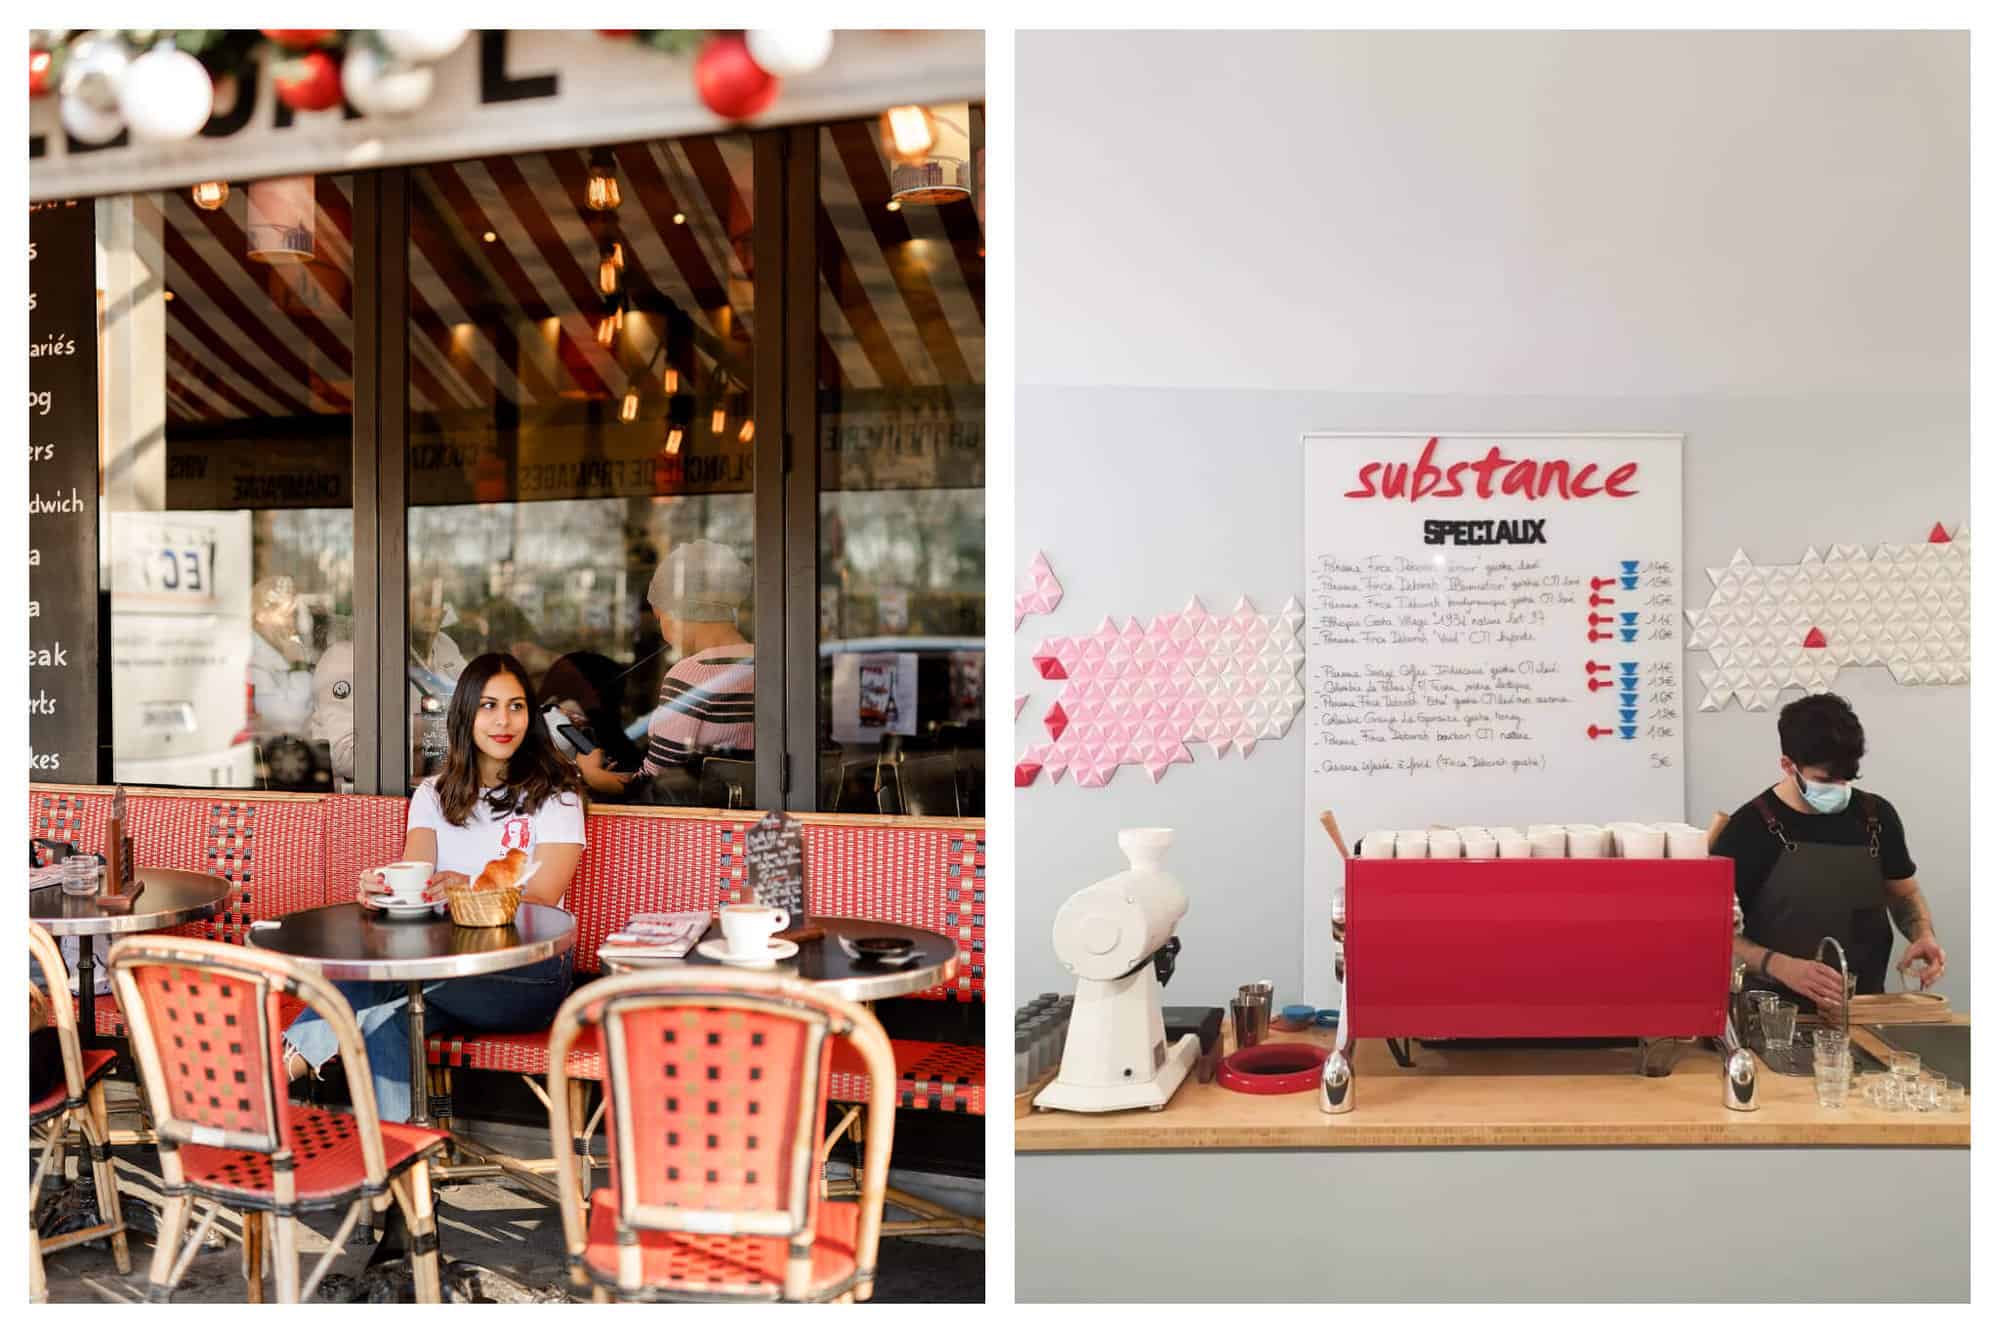 Left: a photo of a girl sitting with a coffee on a Paris terrace, on a red bendh and golden tables. Right: a photo of the inside of the Paris Substance Coffee shop in Paris, with the barista preparing coffees on a red coffee machine. 